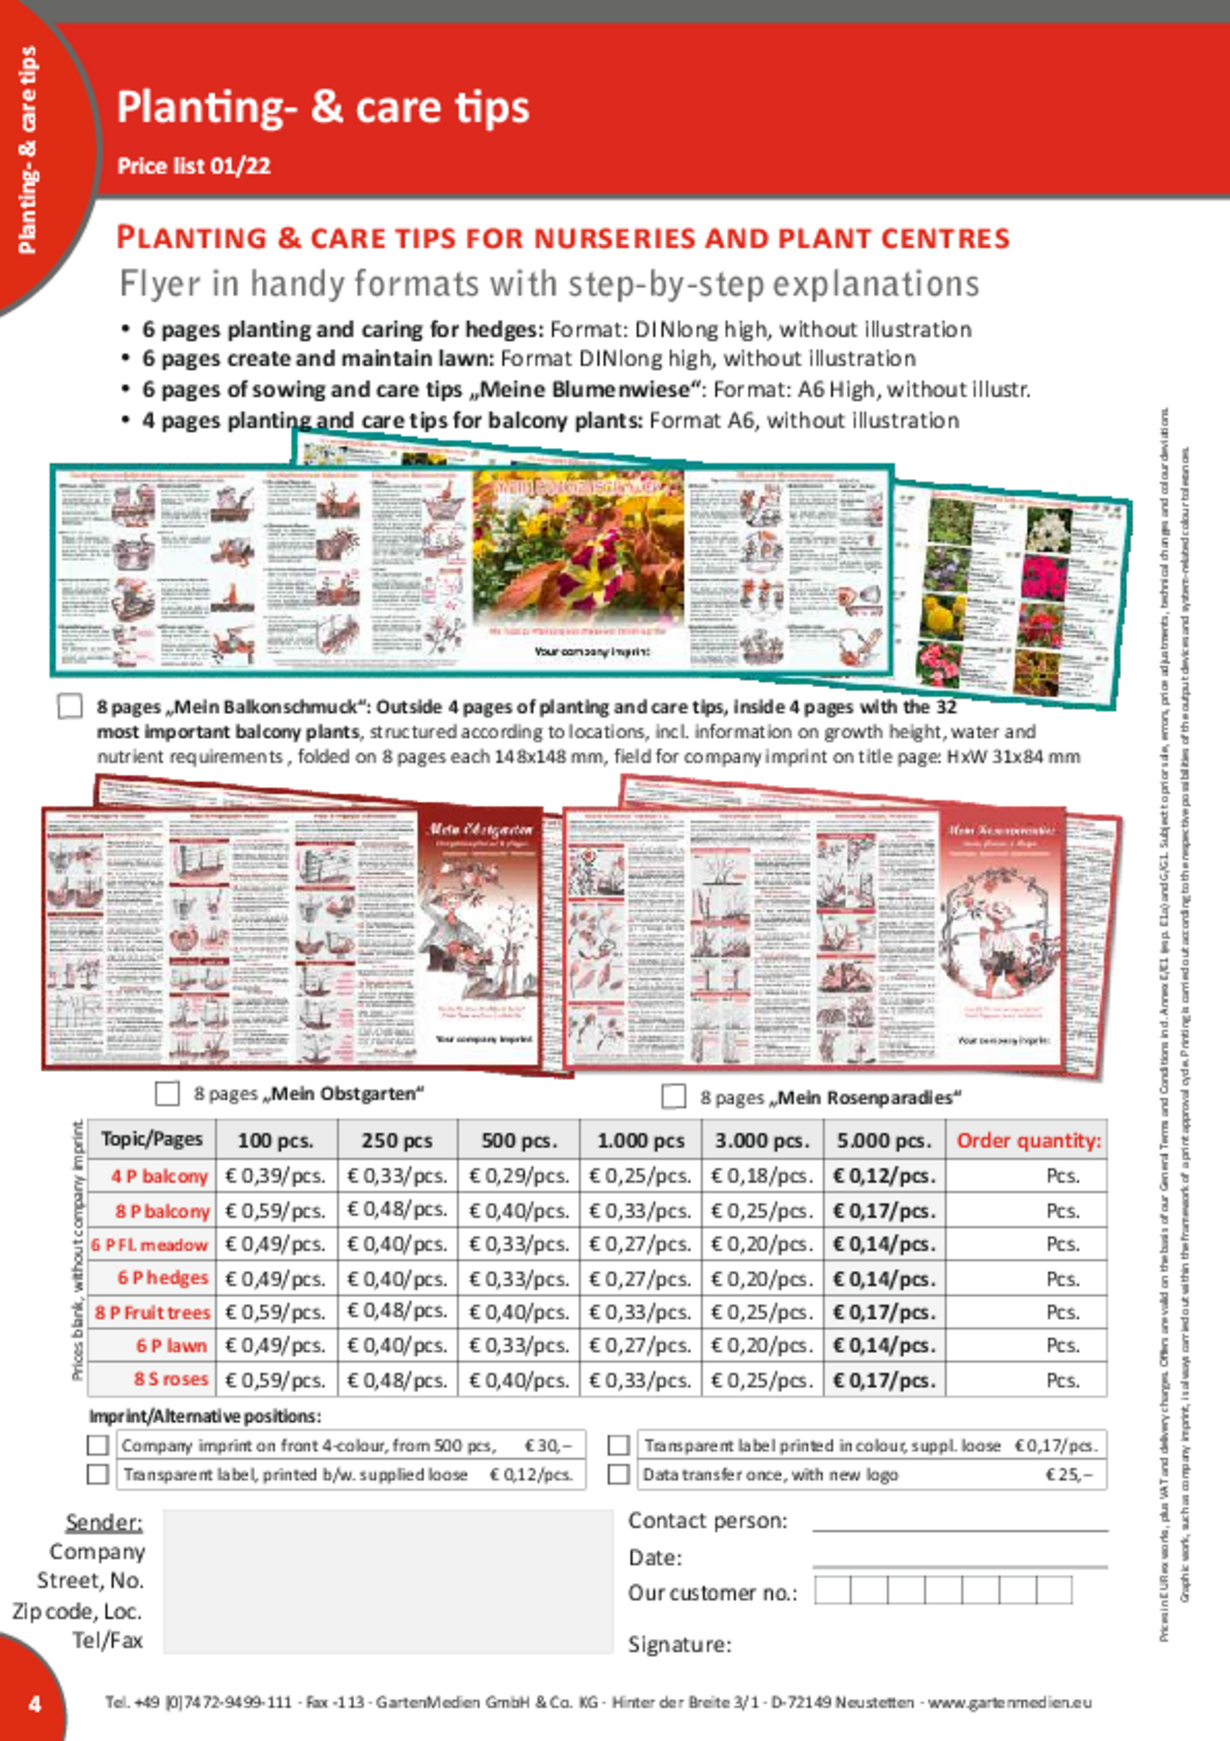 Price list planting and care tips Flyer 2022/01